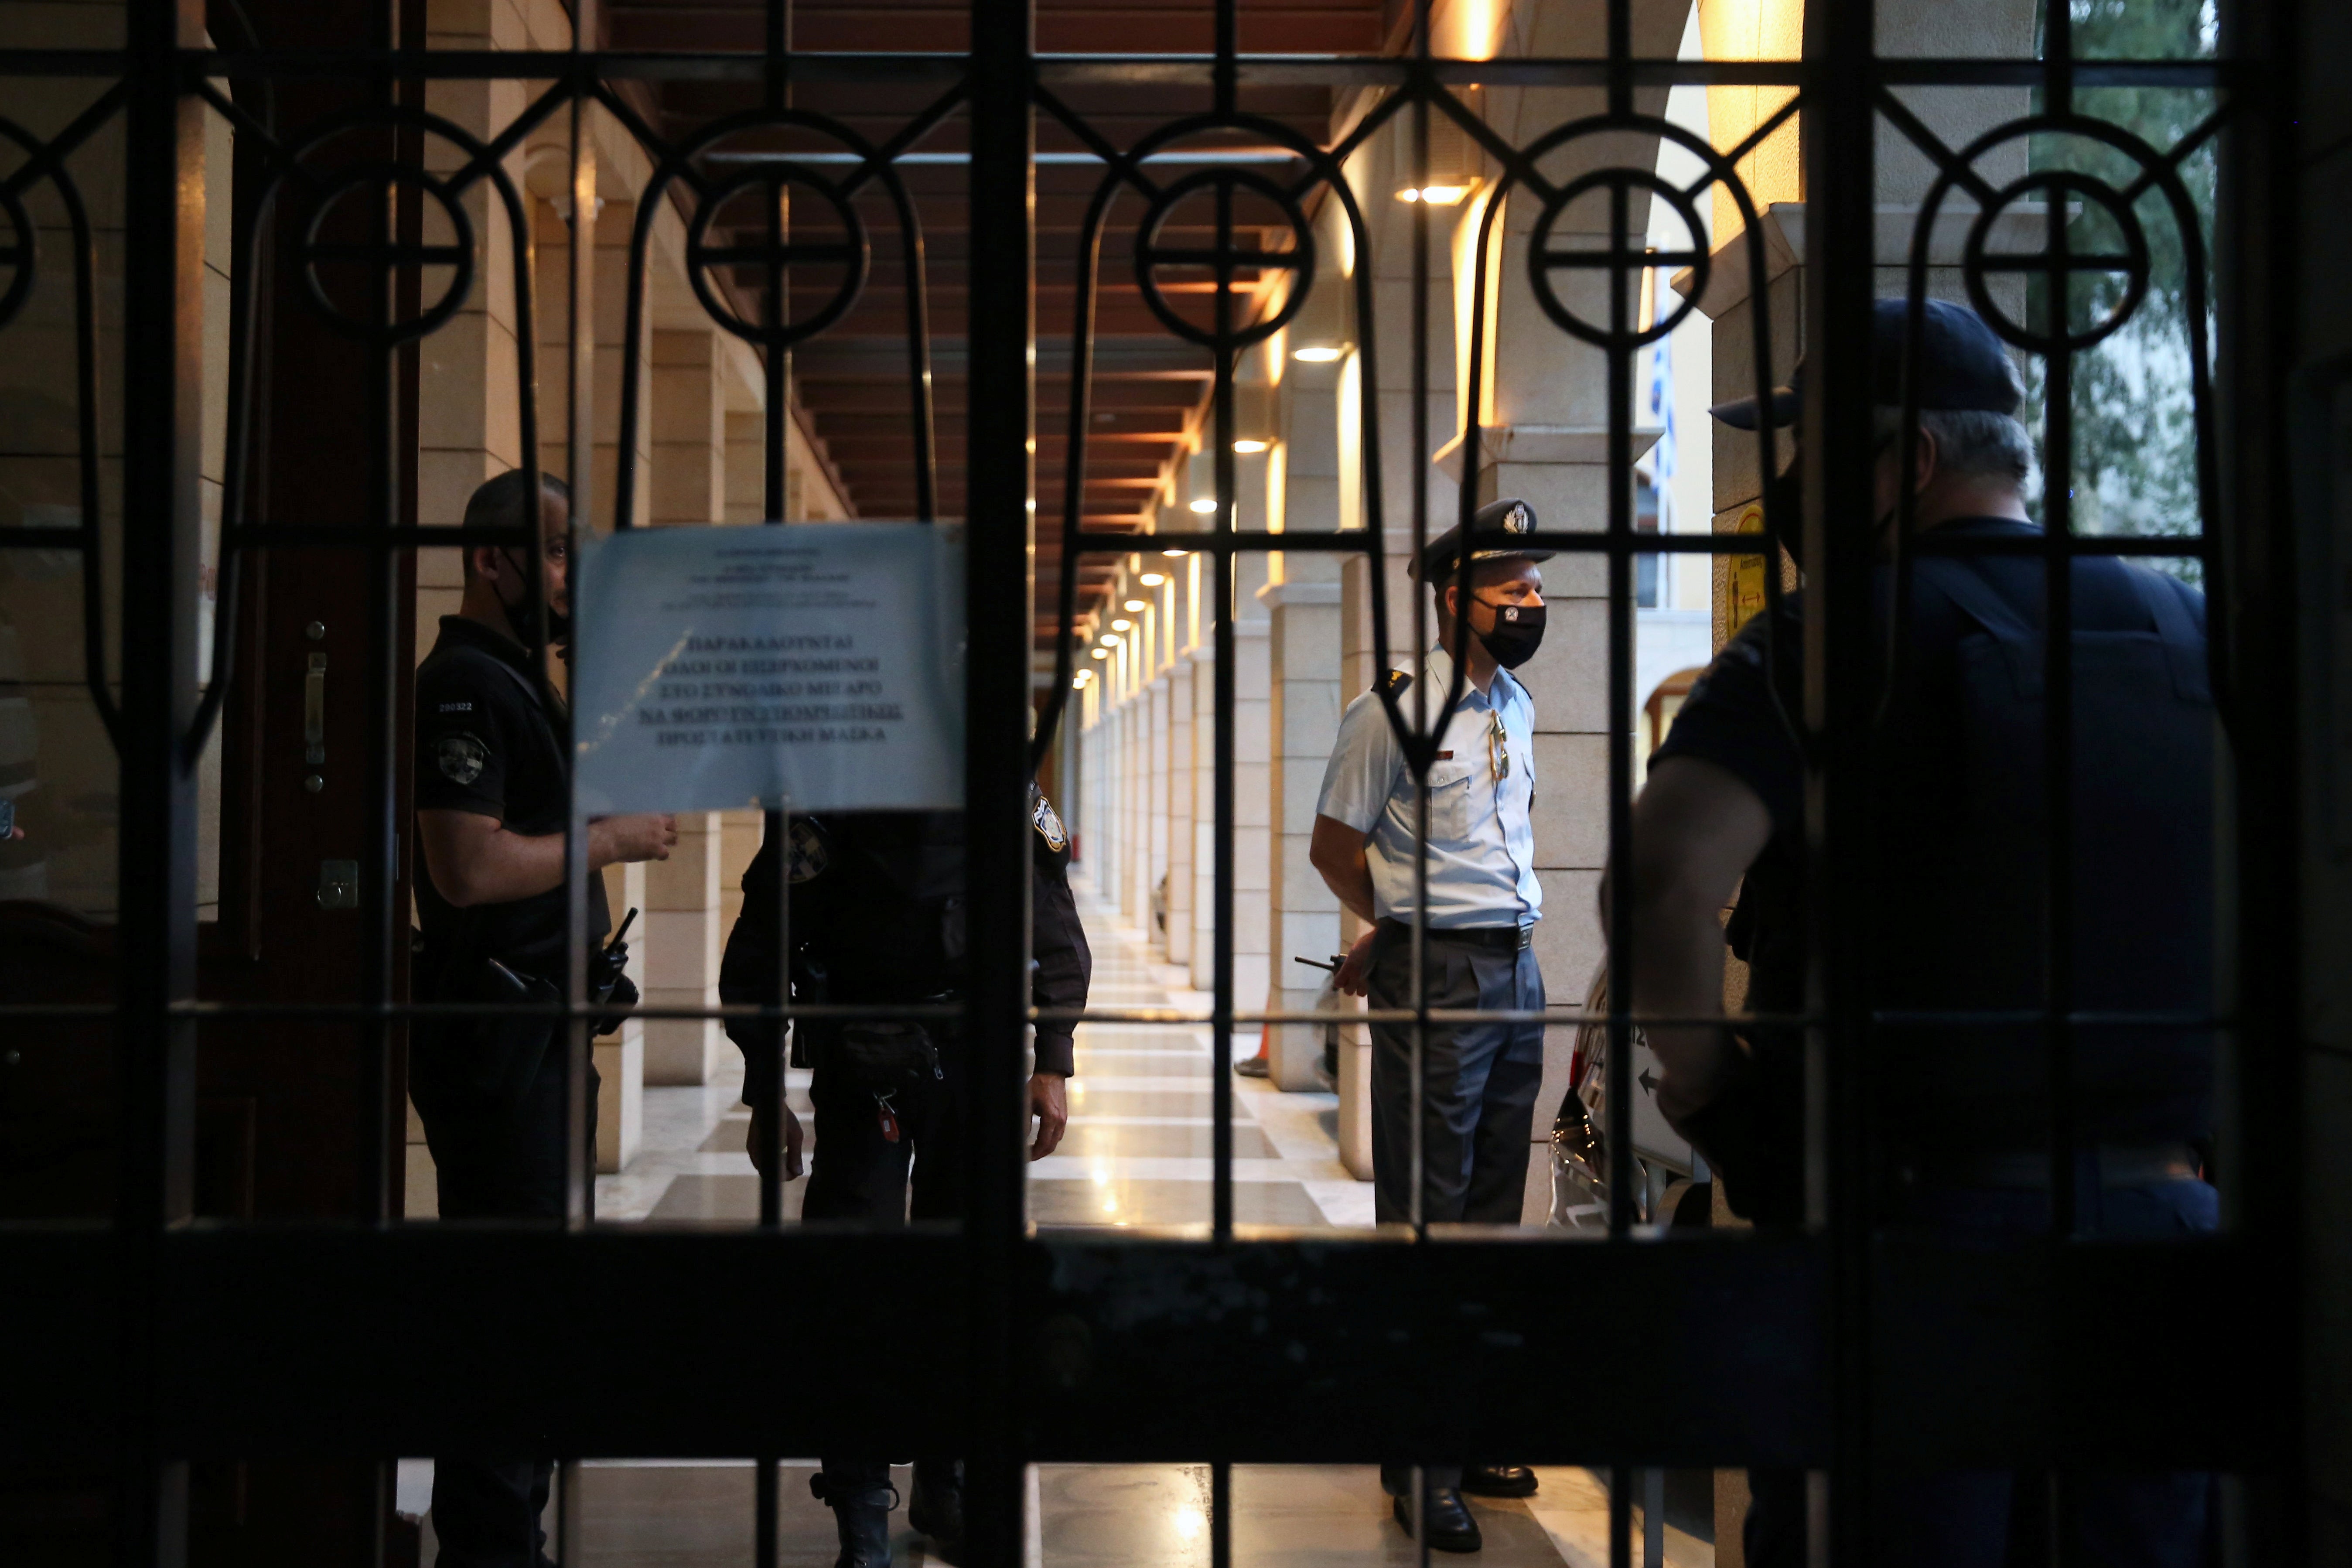 Security guards at the gate of the Petraki Monastery in Athens, where a priest threw acid at bishops earlier this week